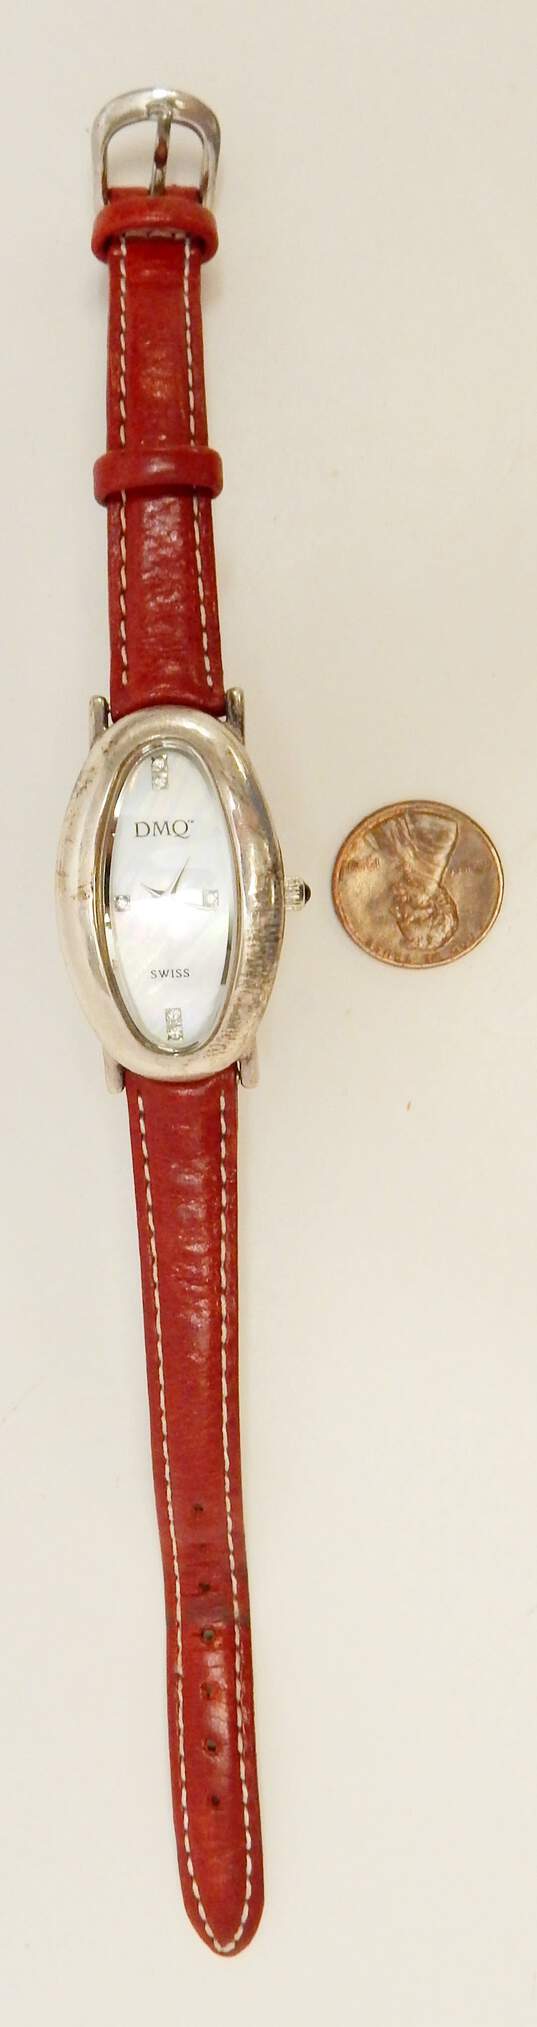 DMQ 925 Diamonique CZ Mother Of Pearl Dial Red Leather Strap Swiss Watch 21.0g image number 9